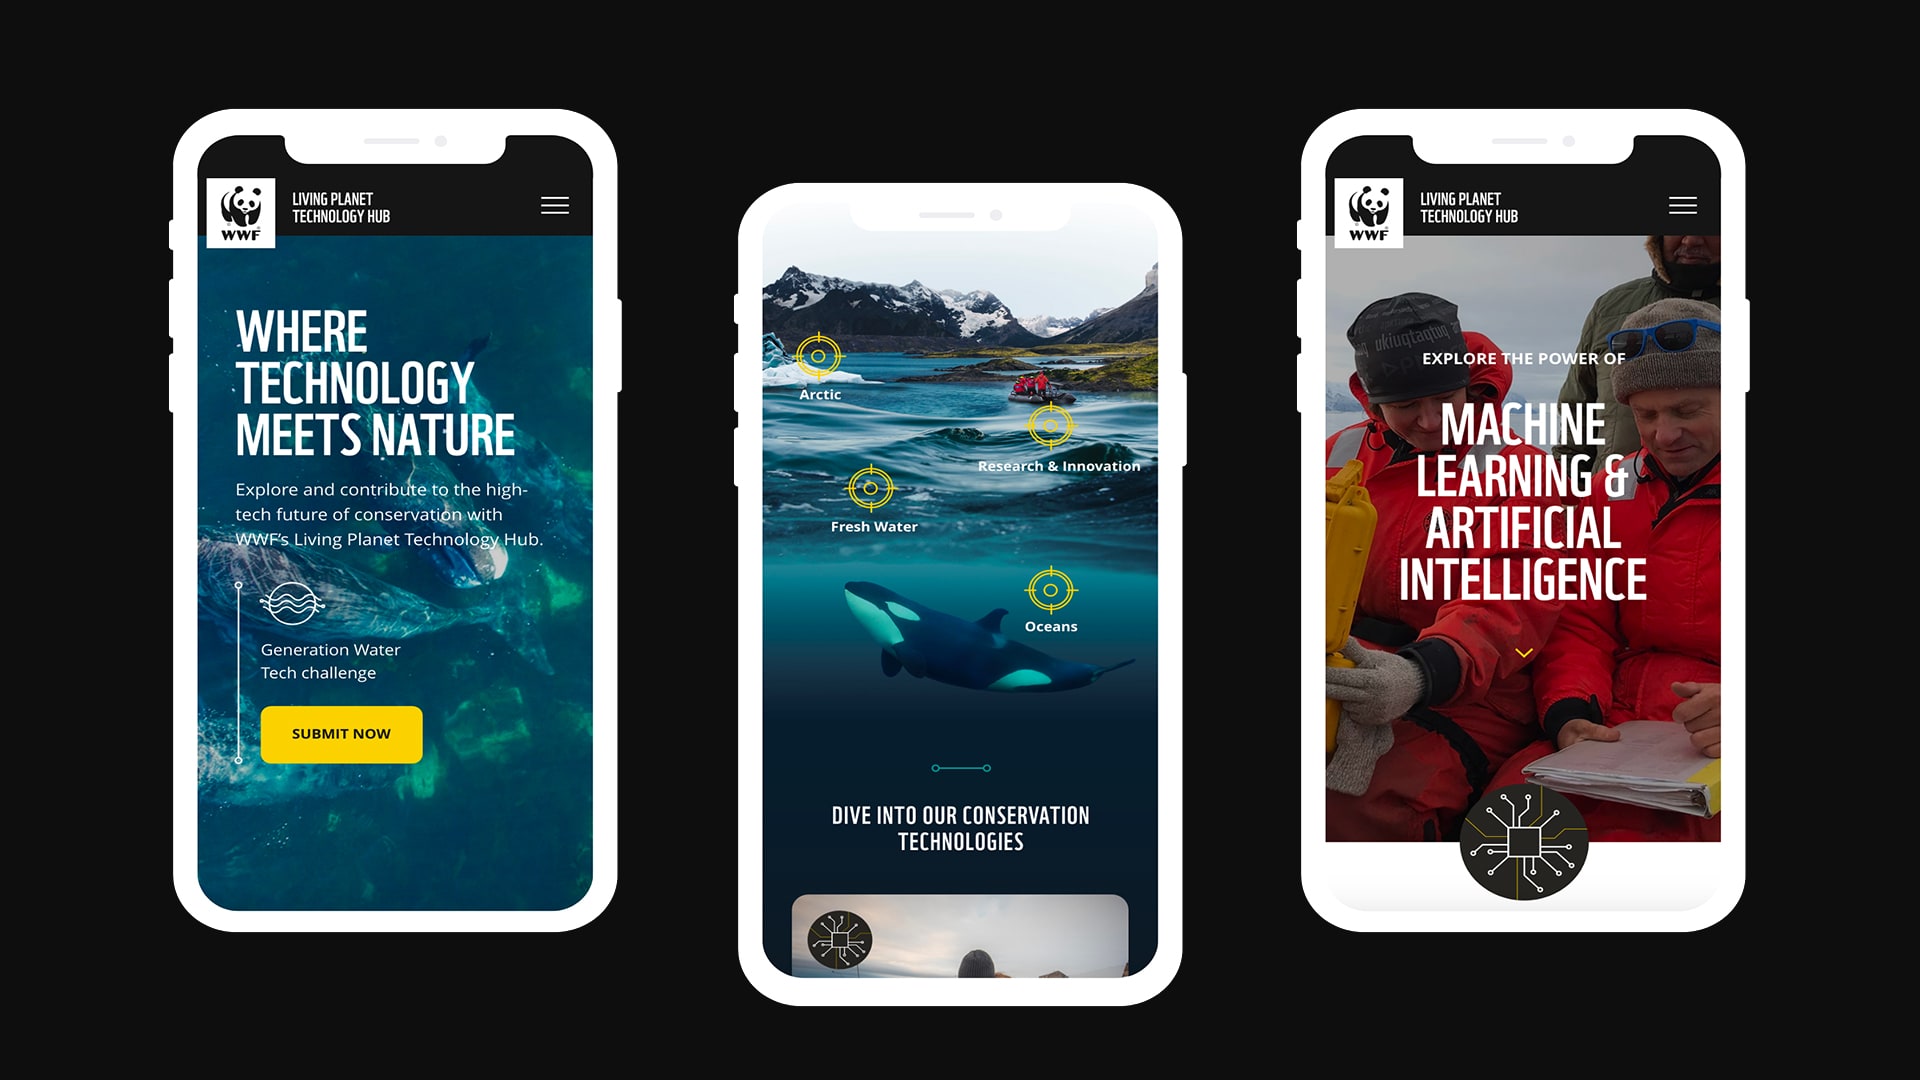 This case study shows how Loop has collaborated with WWF Canada to design for social good.